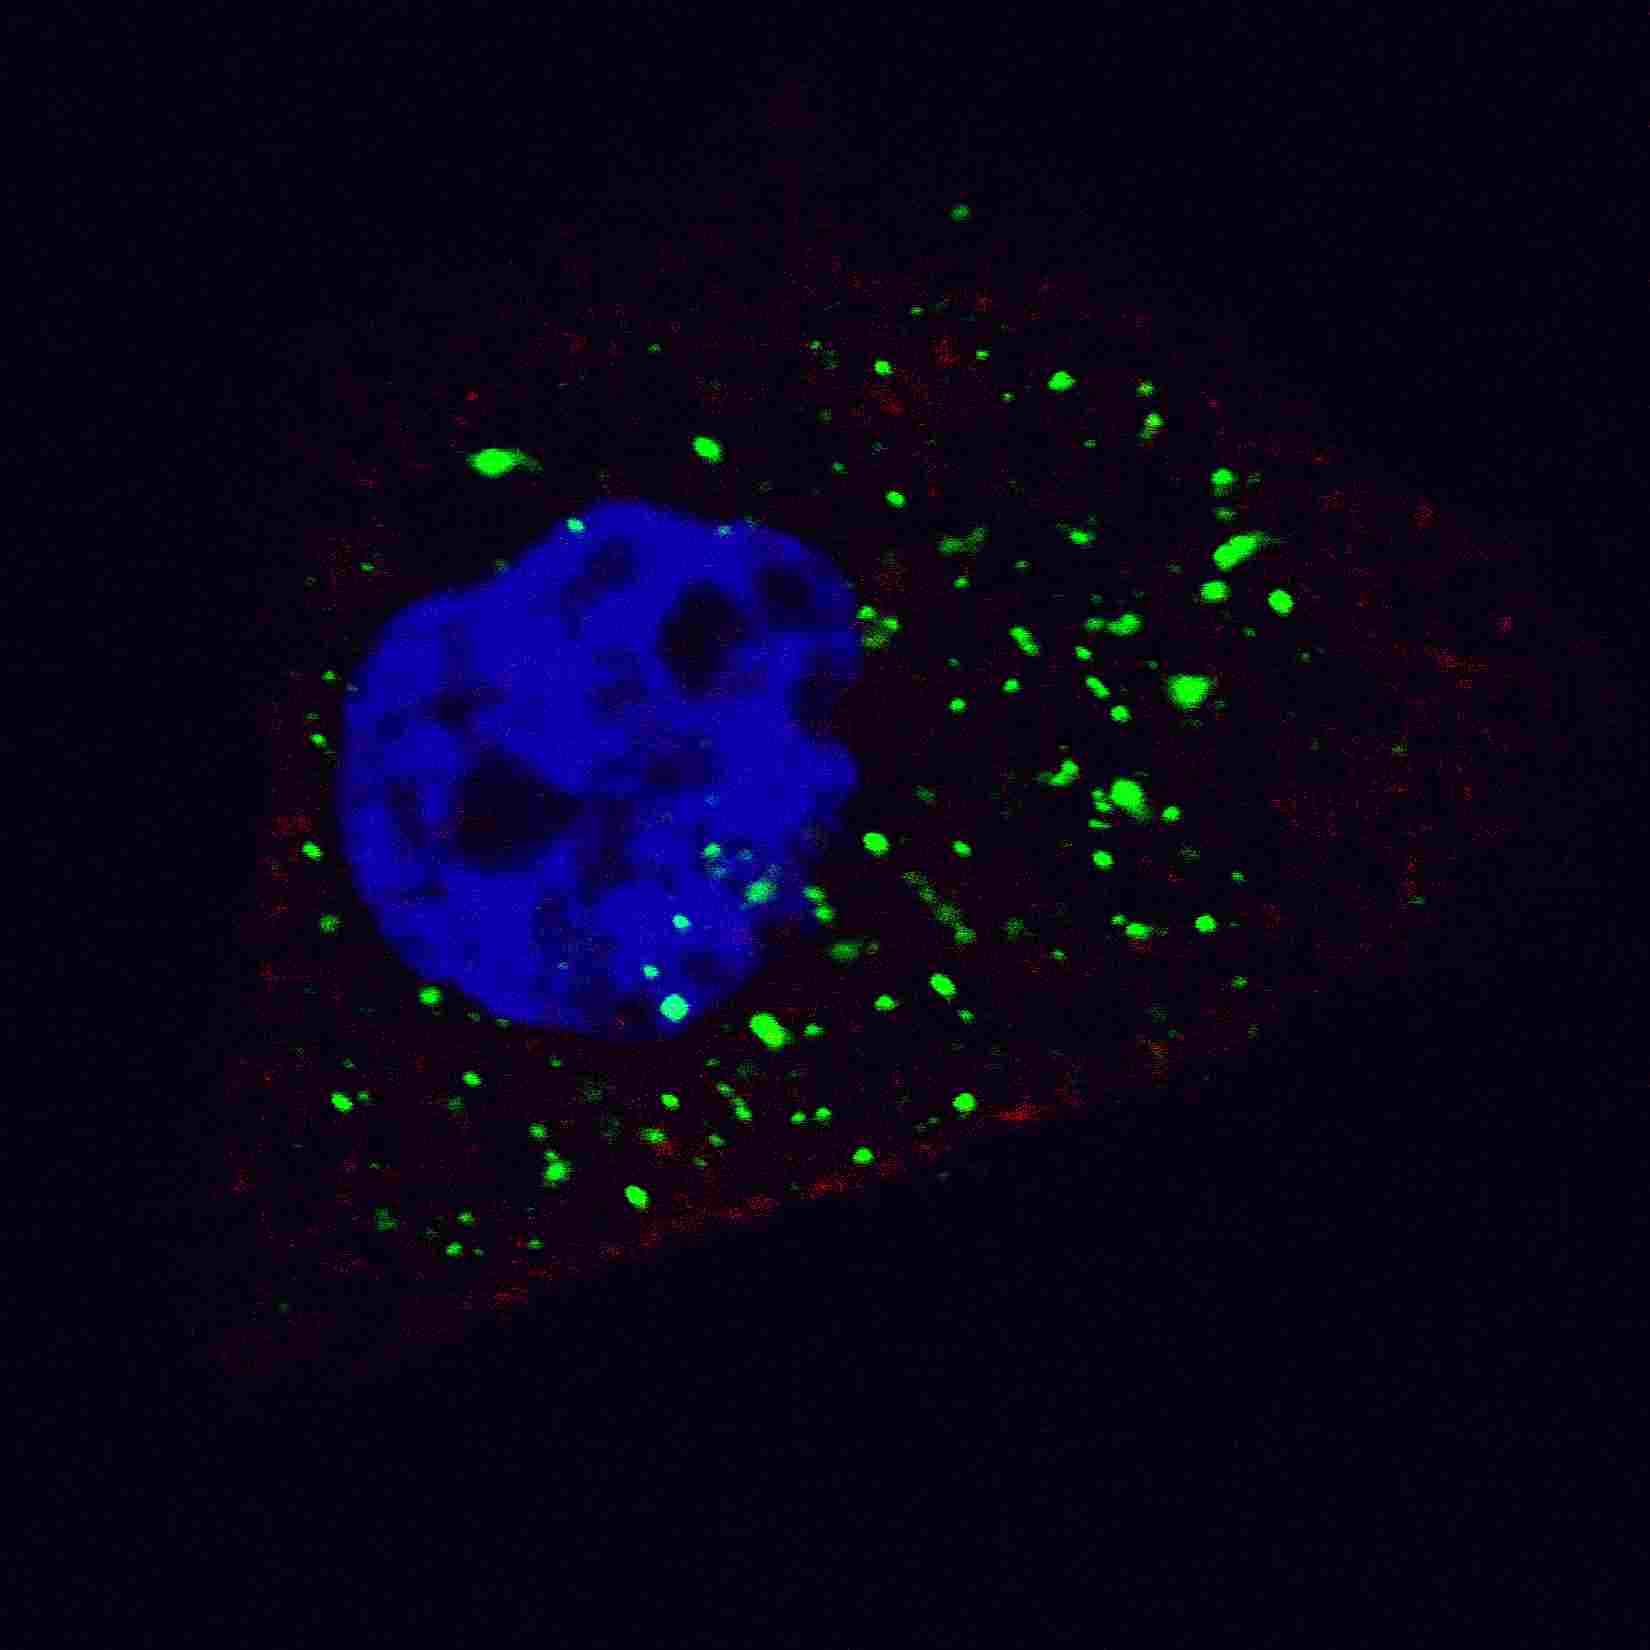 Fluorescent image of U251 cells stained with ATG4B (C-term) antibody. U251 cells were treated with Chloroquine (50 ?M,16h), then fixed with 4% PFA (20 min), permeabilized with Triton X-100 (0.2%, 30 min). Cells were then incubated with AP1809c ATG4B (C-term) primary antibody (1:100, 2 h at room temperature). For secondary antibody, Alexa Fluor� 488 conjugated donkey anti-rabbit antibody (green) was used (1:1000, 1h). Nuclei were counterstained with Hoechst 33342 (blue) (10 ?g/ml, 5 min). ATG4B immunoreactivity is localized to autophagic vacuoles in the cytoplasm of U251 cells.